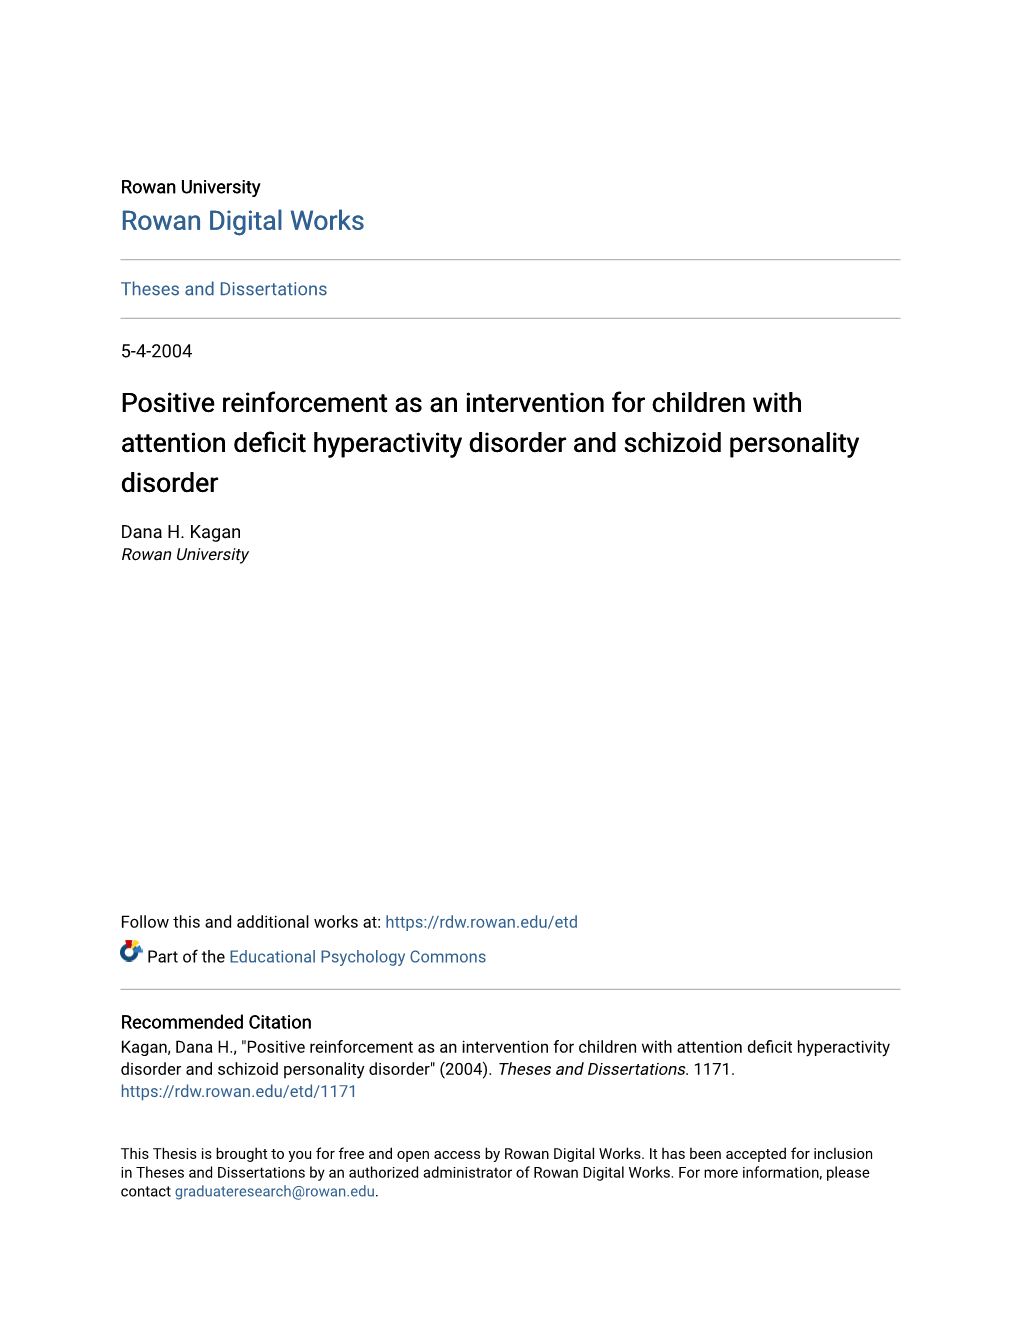 Positive Reinforcement As an Intervention for Children with Attention Deficit Hyperactivity Disorder and Schizoid Personality Disorder